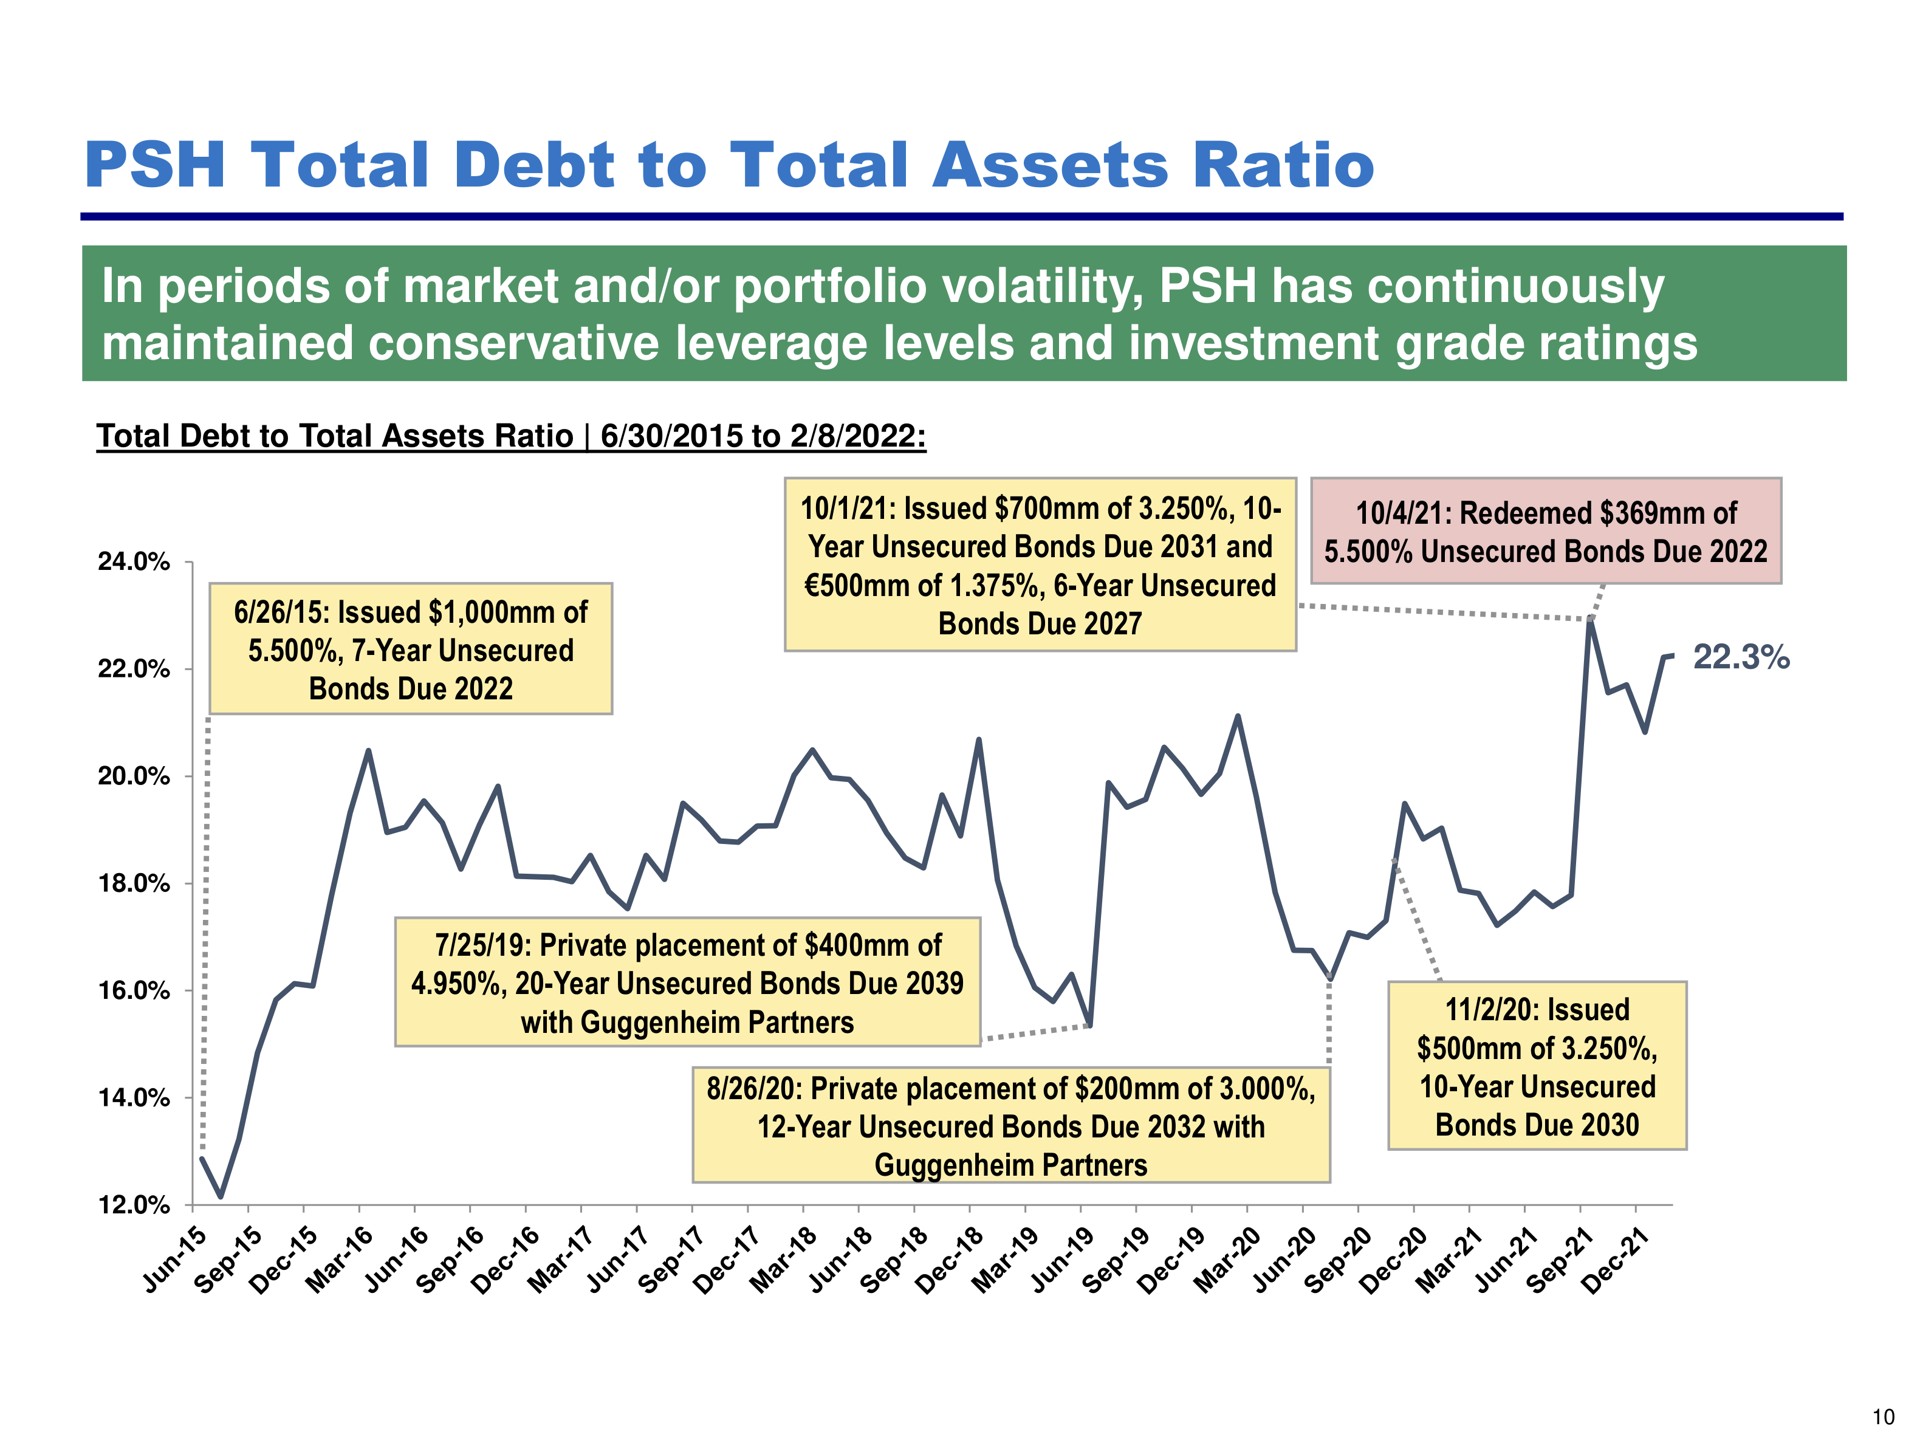 total debt to total assets ratio in periods of market and or portfolio volatility has continuously maintained conservative leverage levels and investment grade ratings | Pershing Square